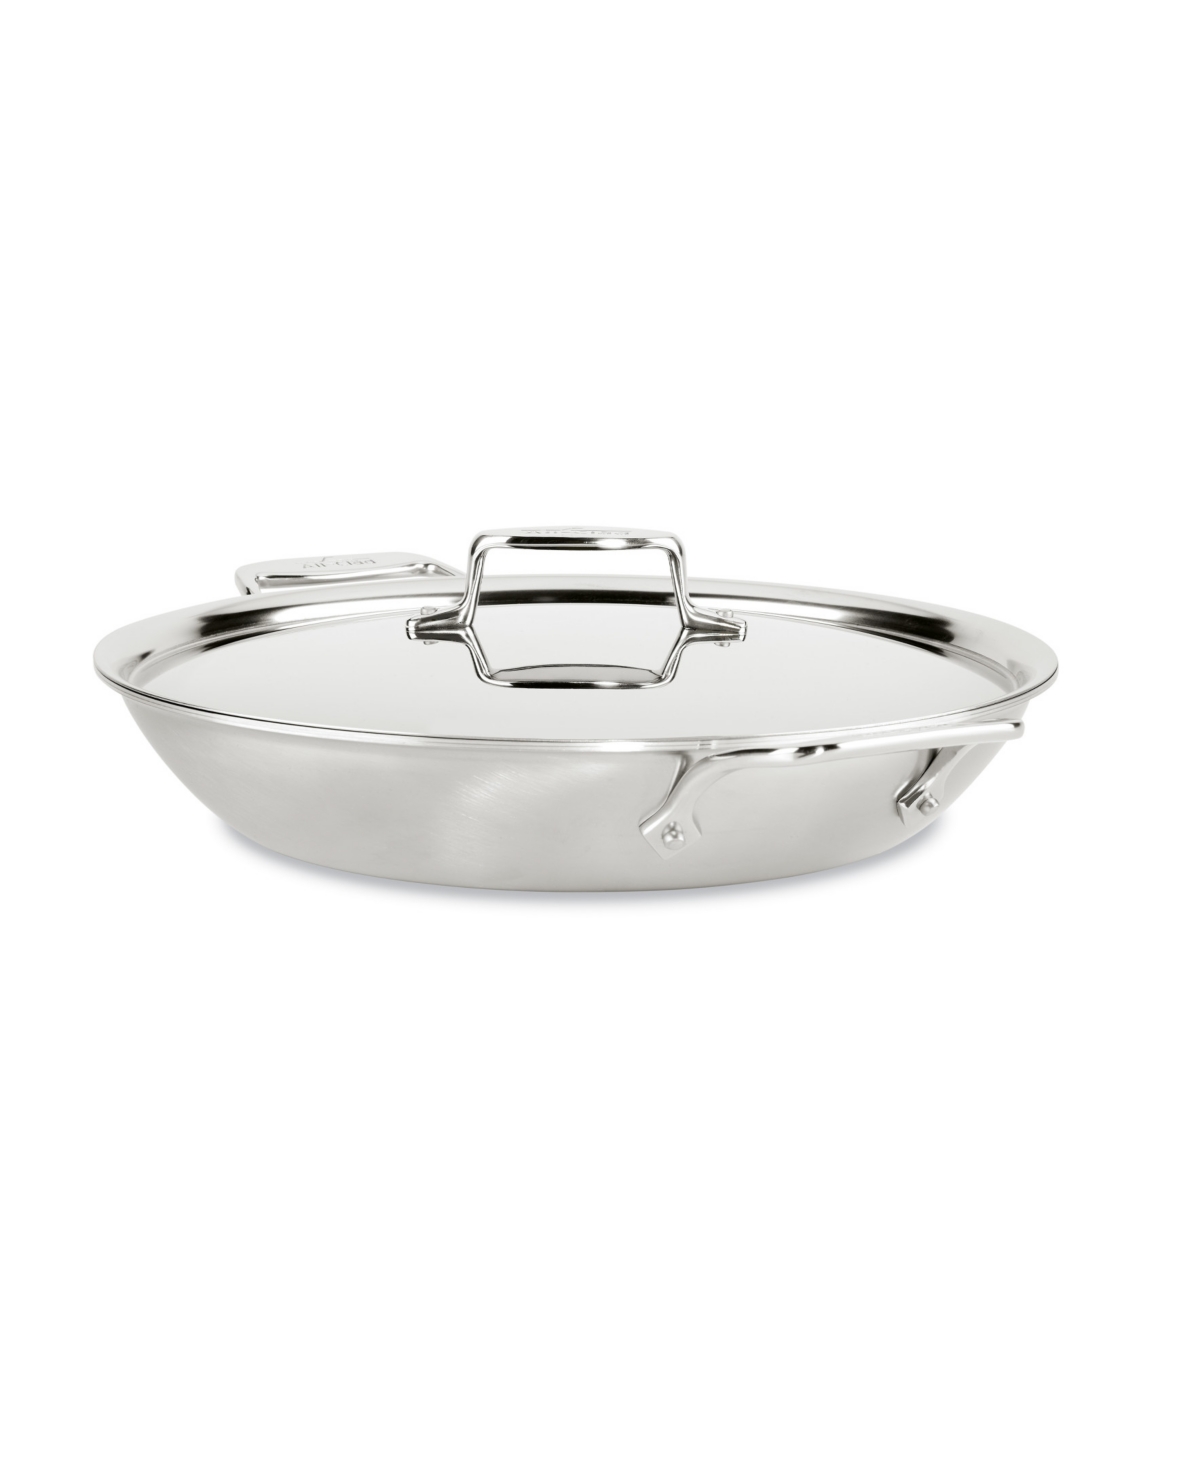 All-Clad D5 Stainless Steel Brushed 5-Ply Bonded 4.5-Quart Universal Pan with Lid